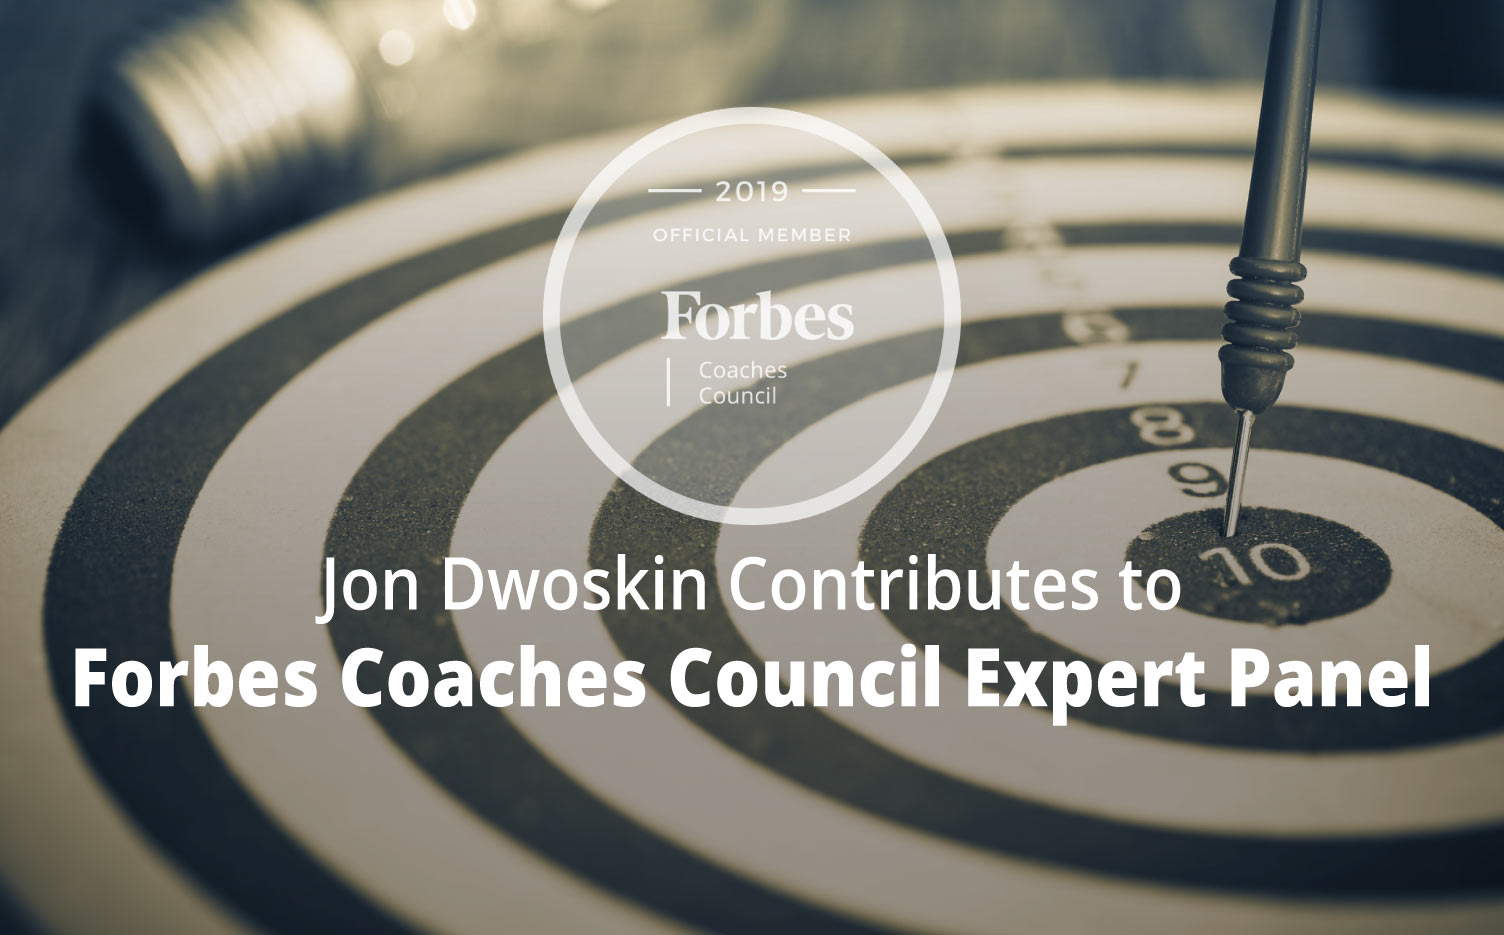 Jon Dwoskin Contributes to Forbes Coaches Council Expert Panel: 15 Ways for Leaders to Give Guidance Without Micromanaging